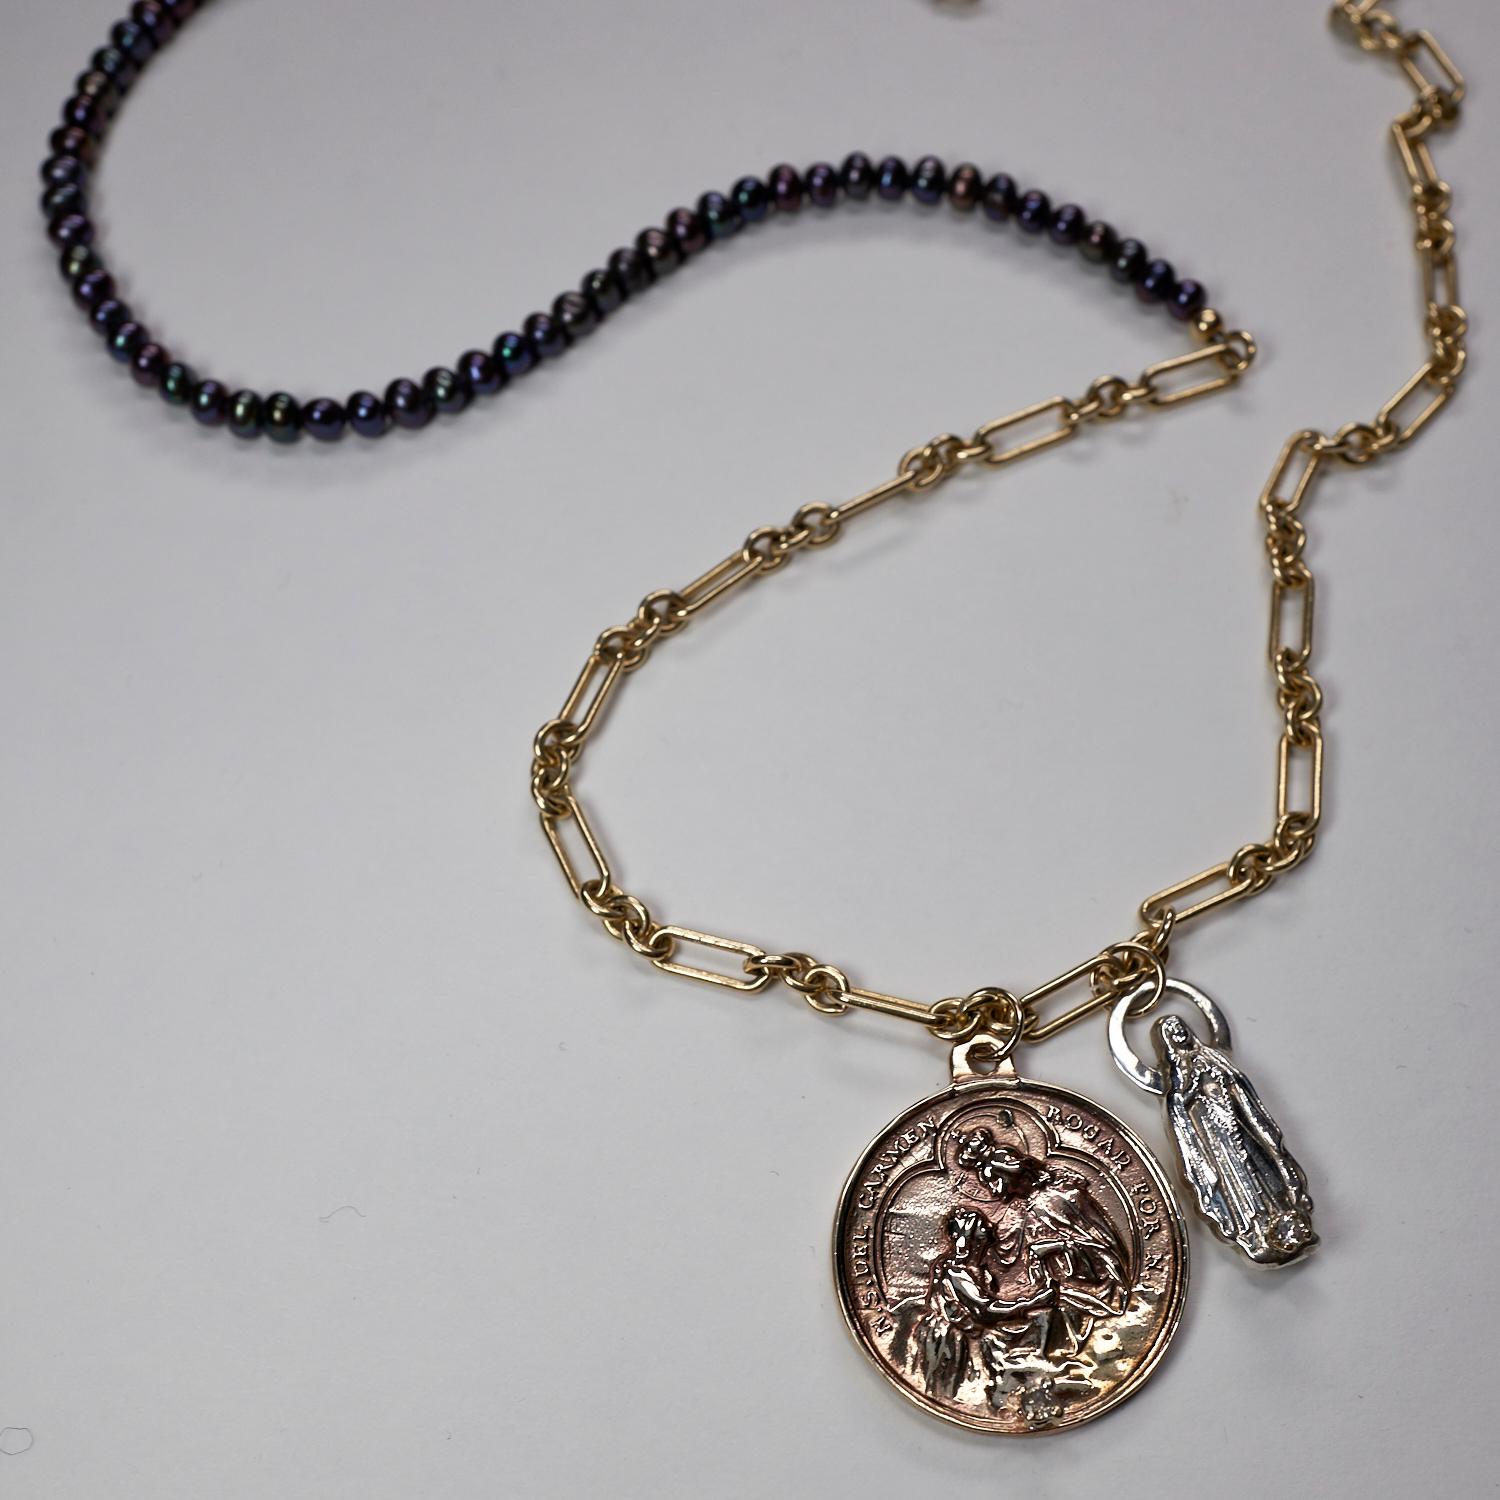 saint mary necklace meaning